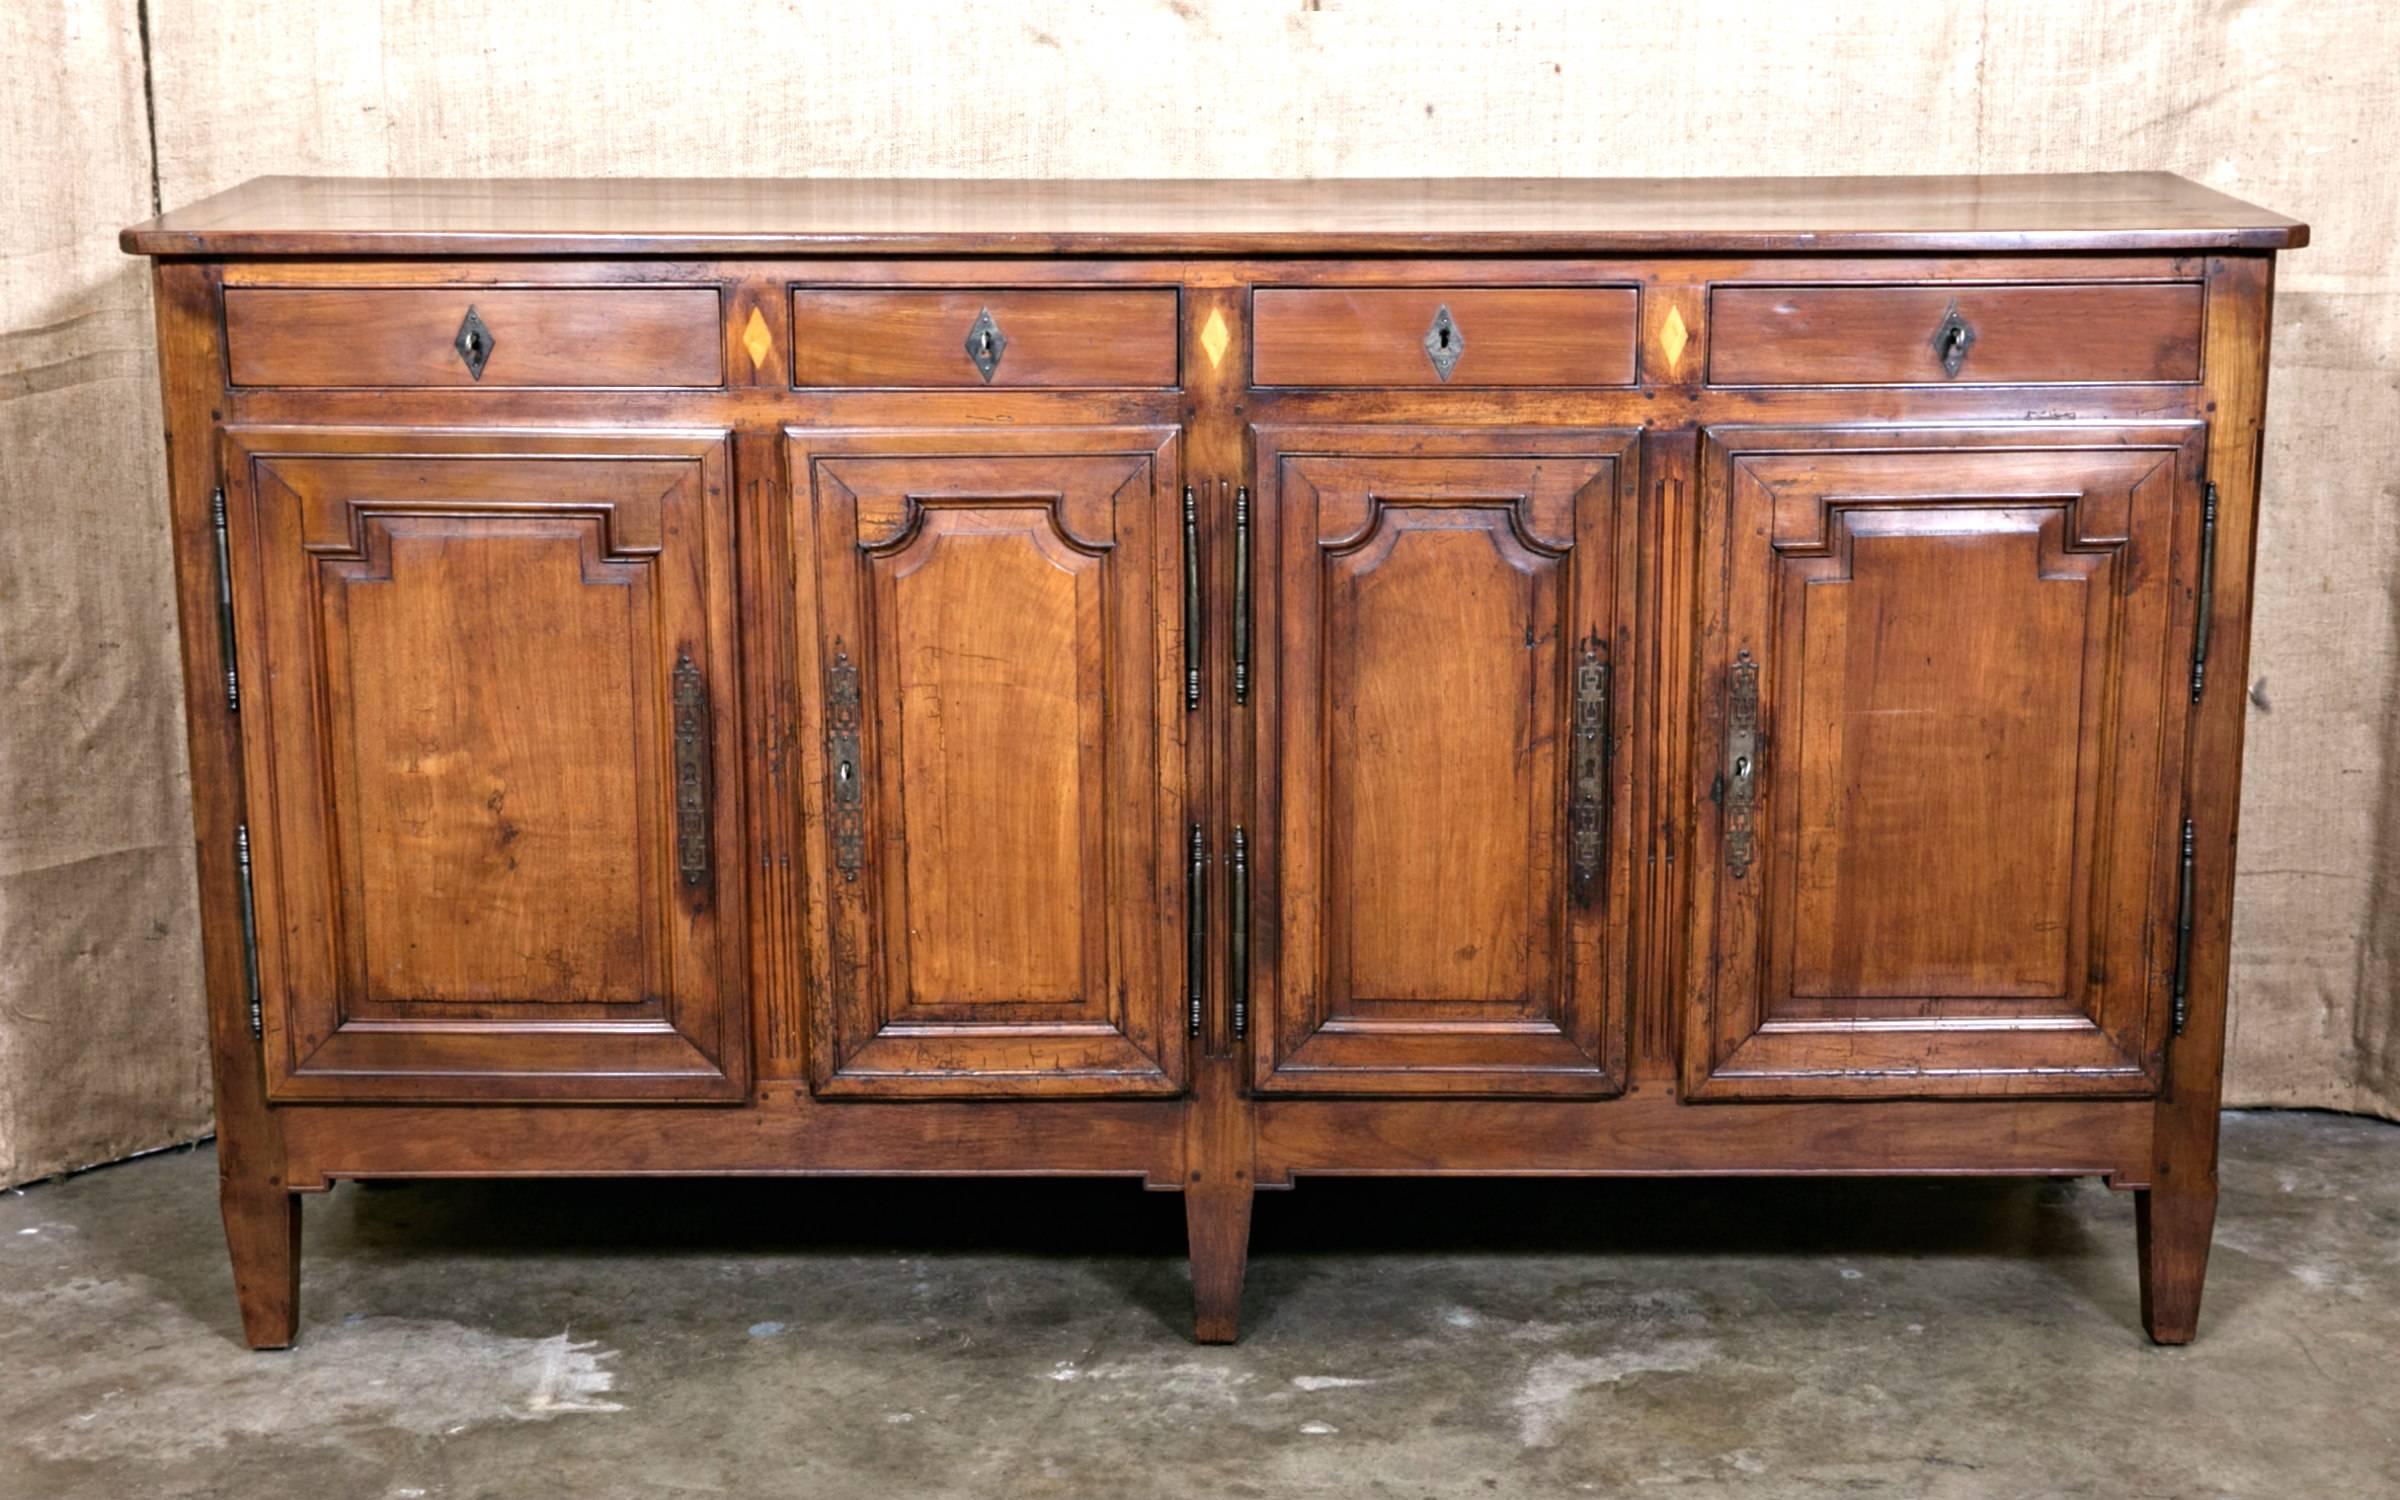 Charming 19th century French Louis XVI style cherrywood and fruitwood inlaid enfilade buffet, having four drawers with ormolu keyhole escutcheons over four paneled doors with decorative escutcheons. This extremely attractive enfilade with its